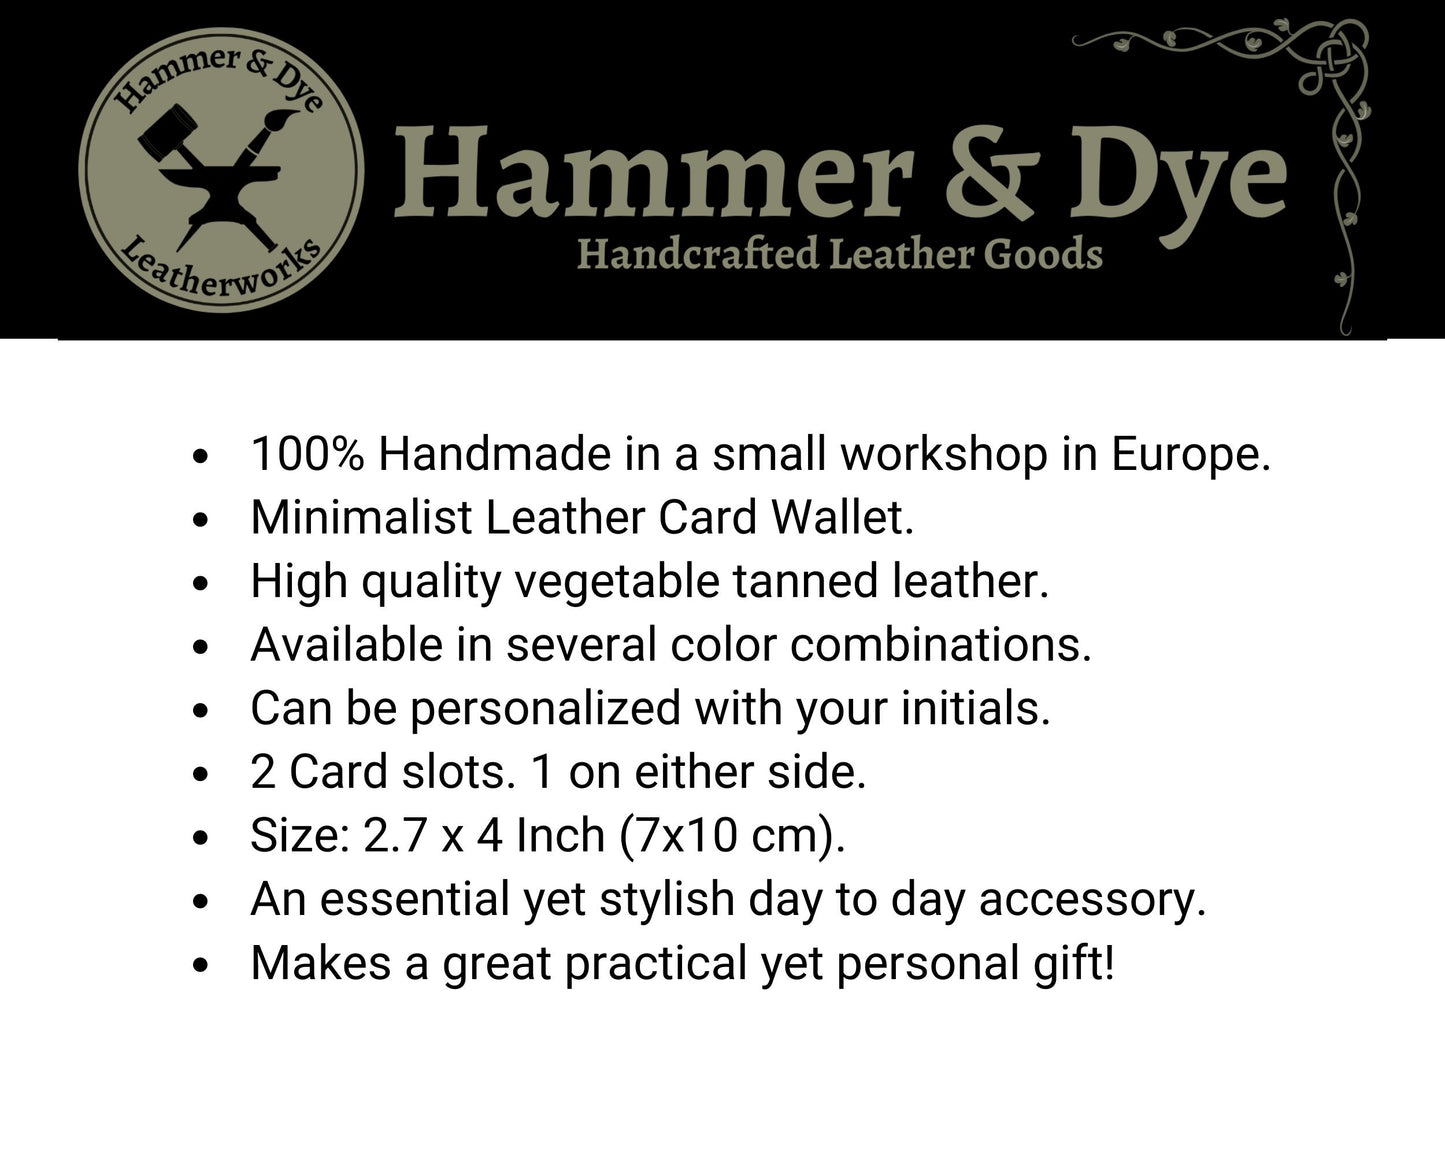 Infographic about the handmade leather minimalist card wallets